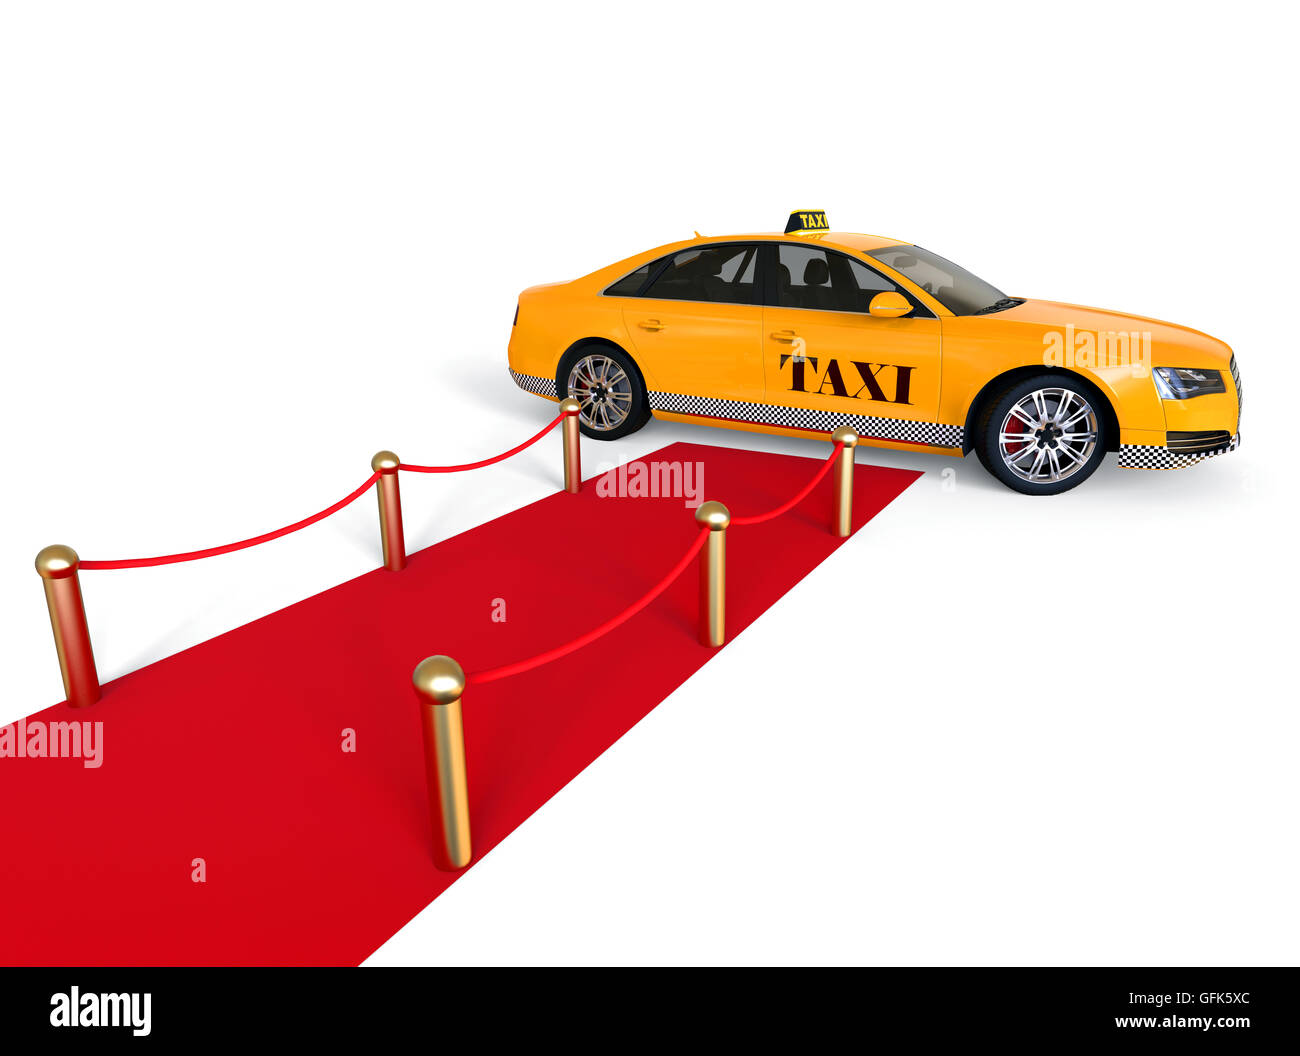 3D render image of a red carpet with a taxi at the end representing high class taxi service. Stock Photo